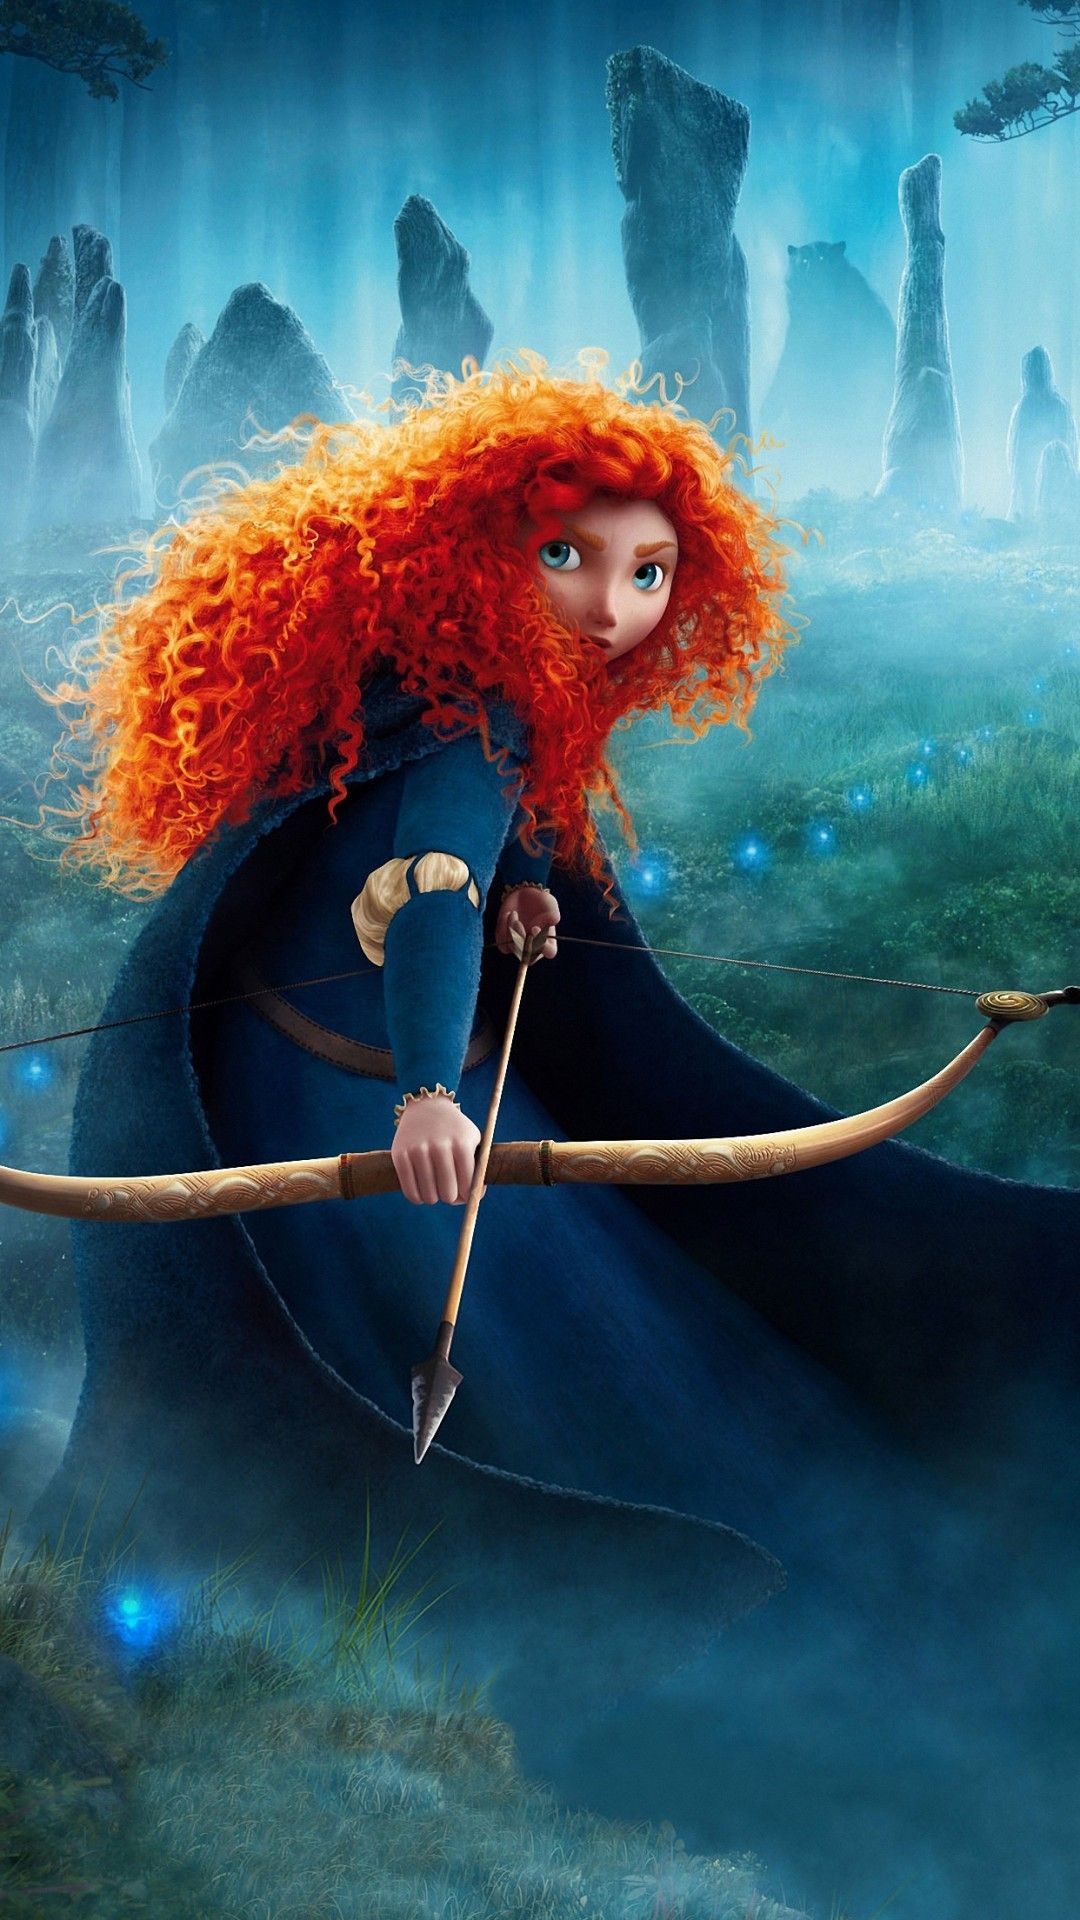 Brave Movie Wallpapers - Wallpaper Cave